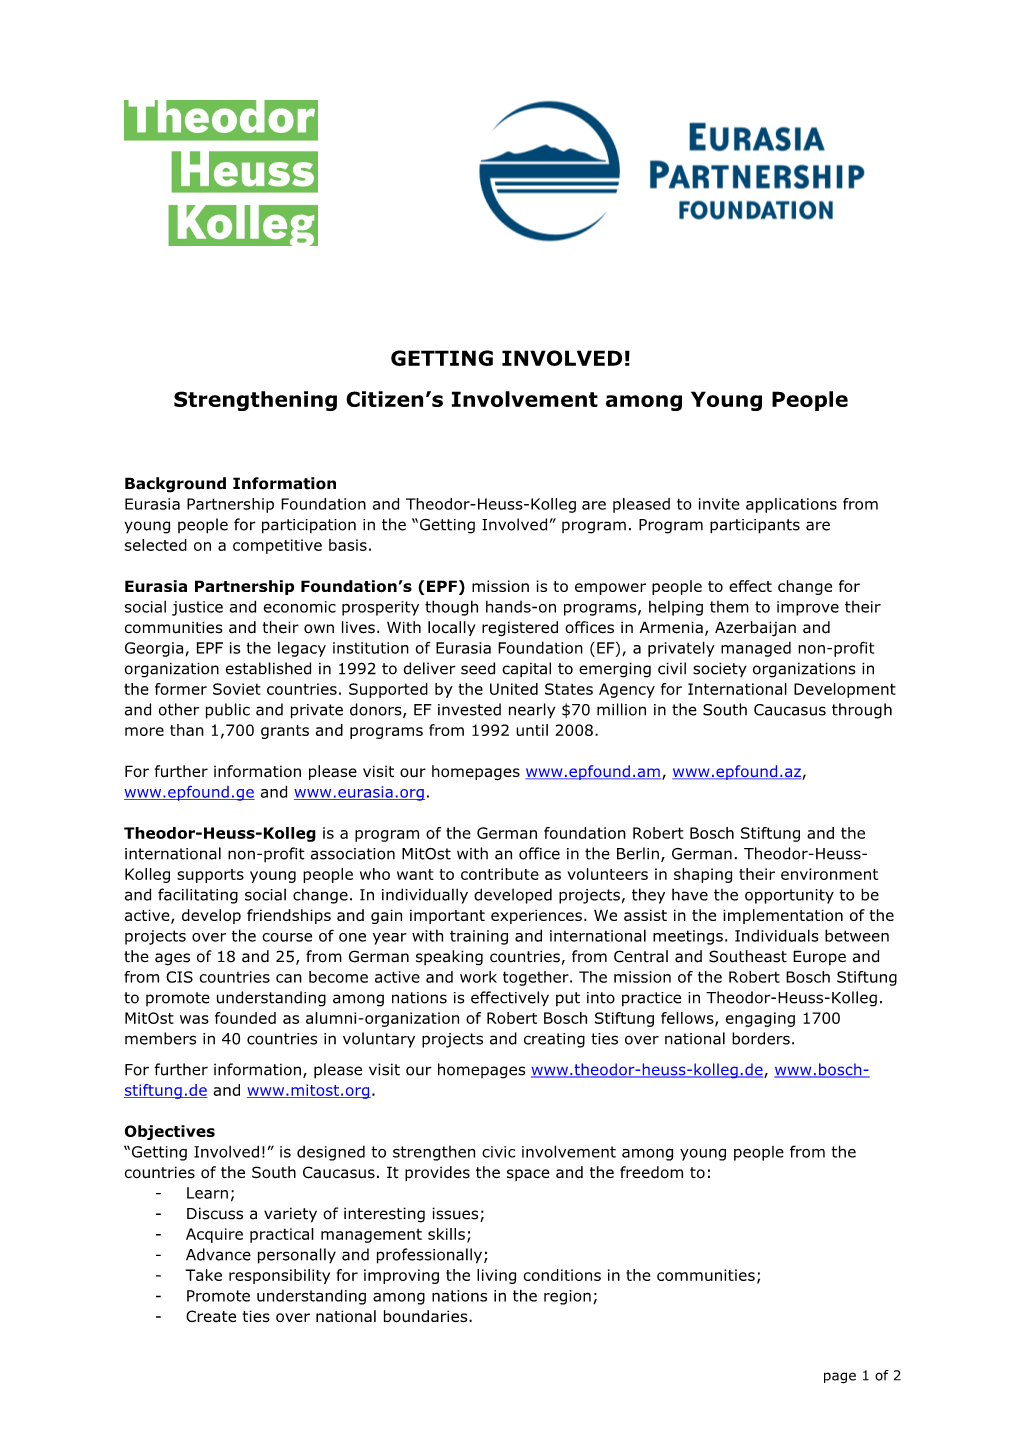 GETTING INVOLVED! Strengthening Citizen's Involvement Among Young